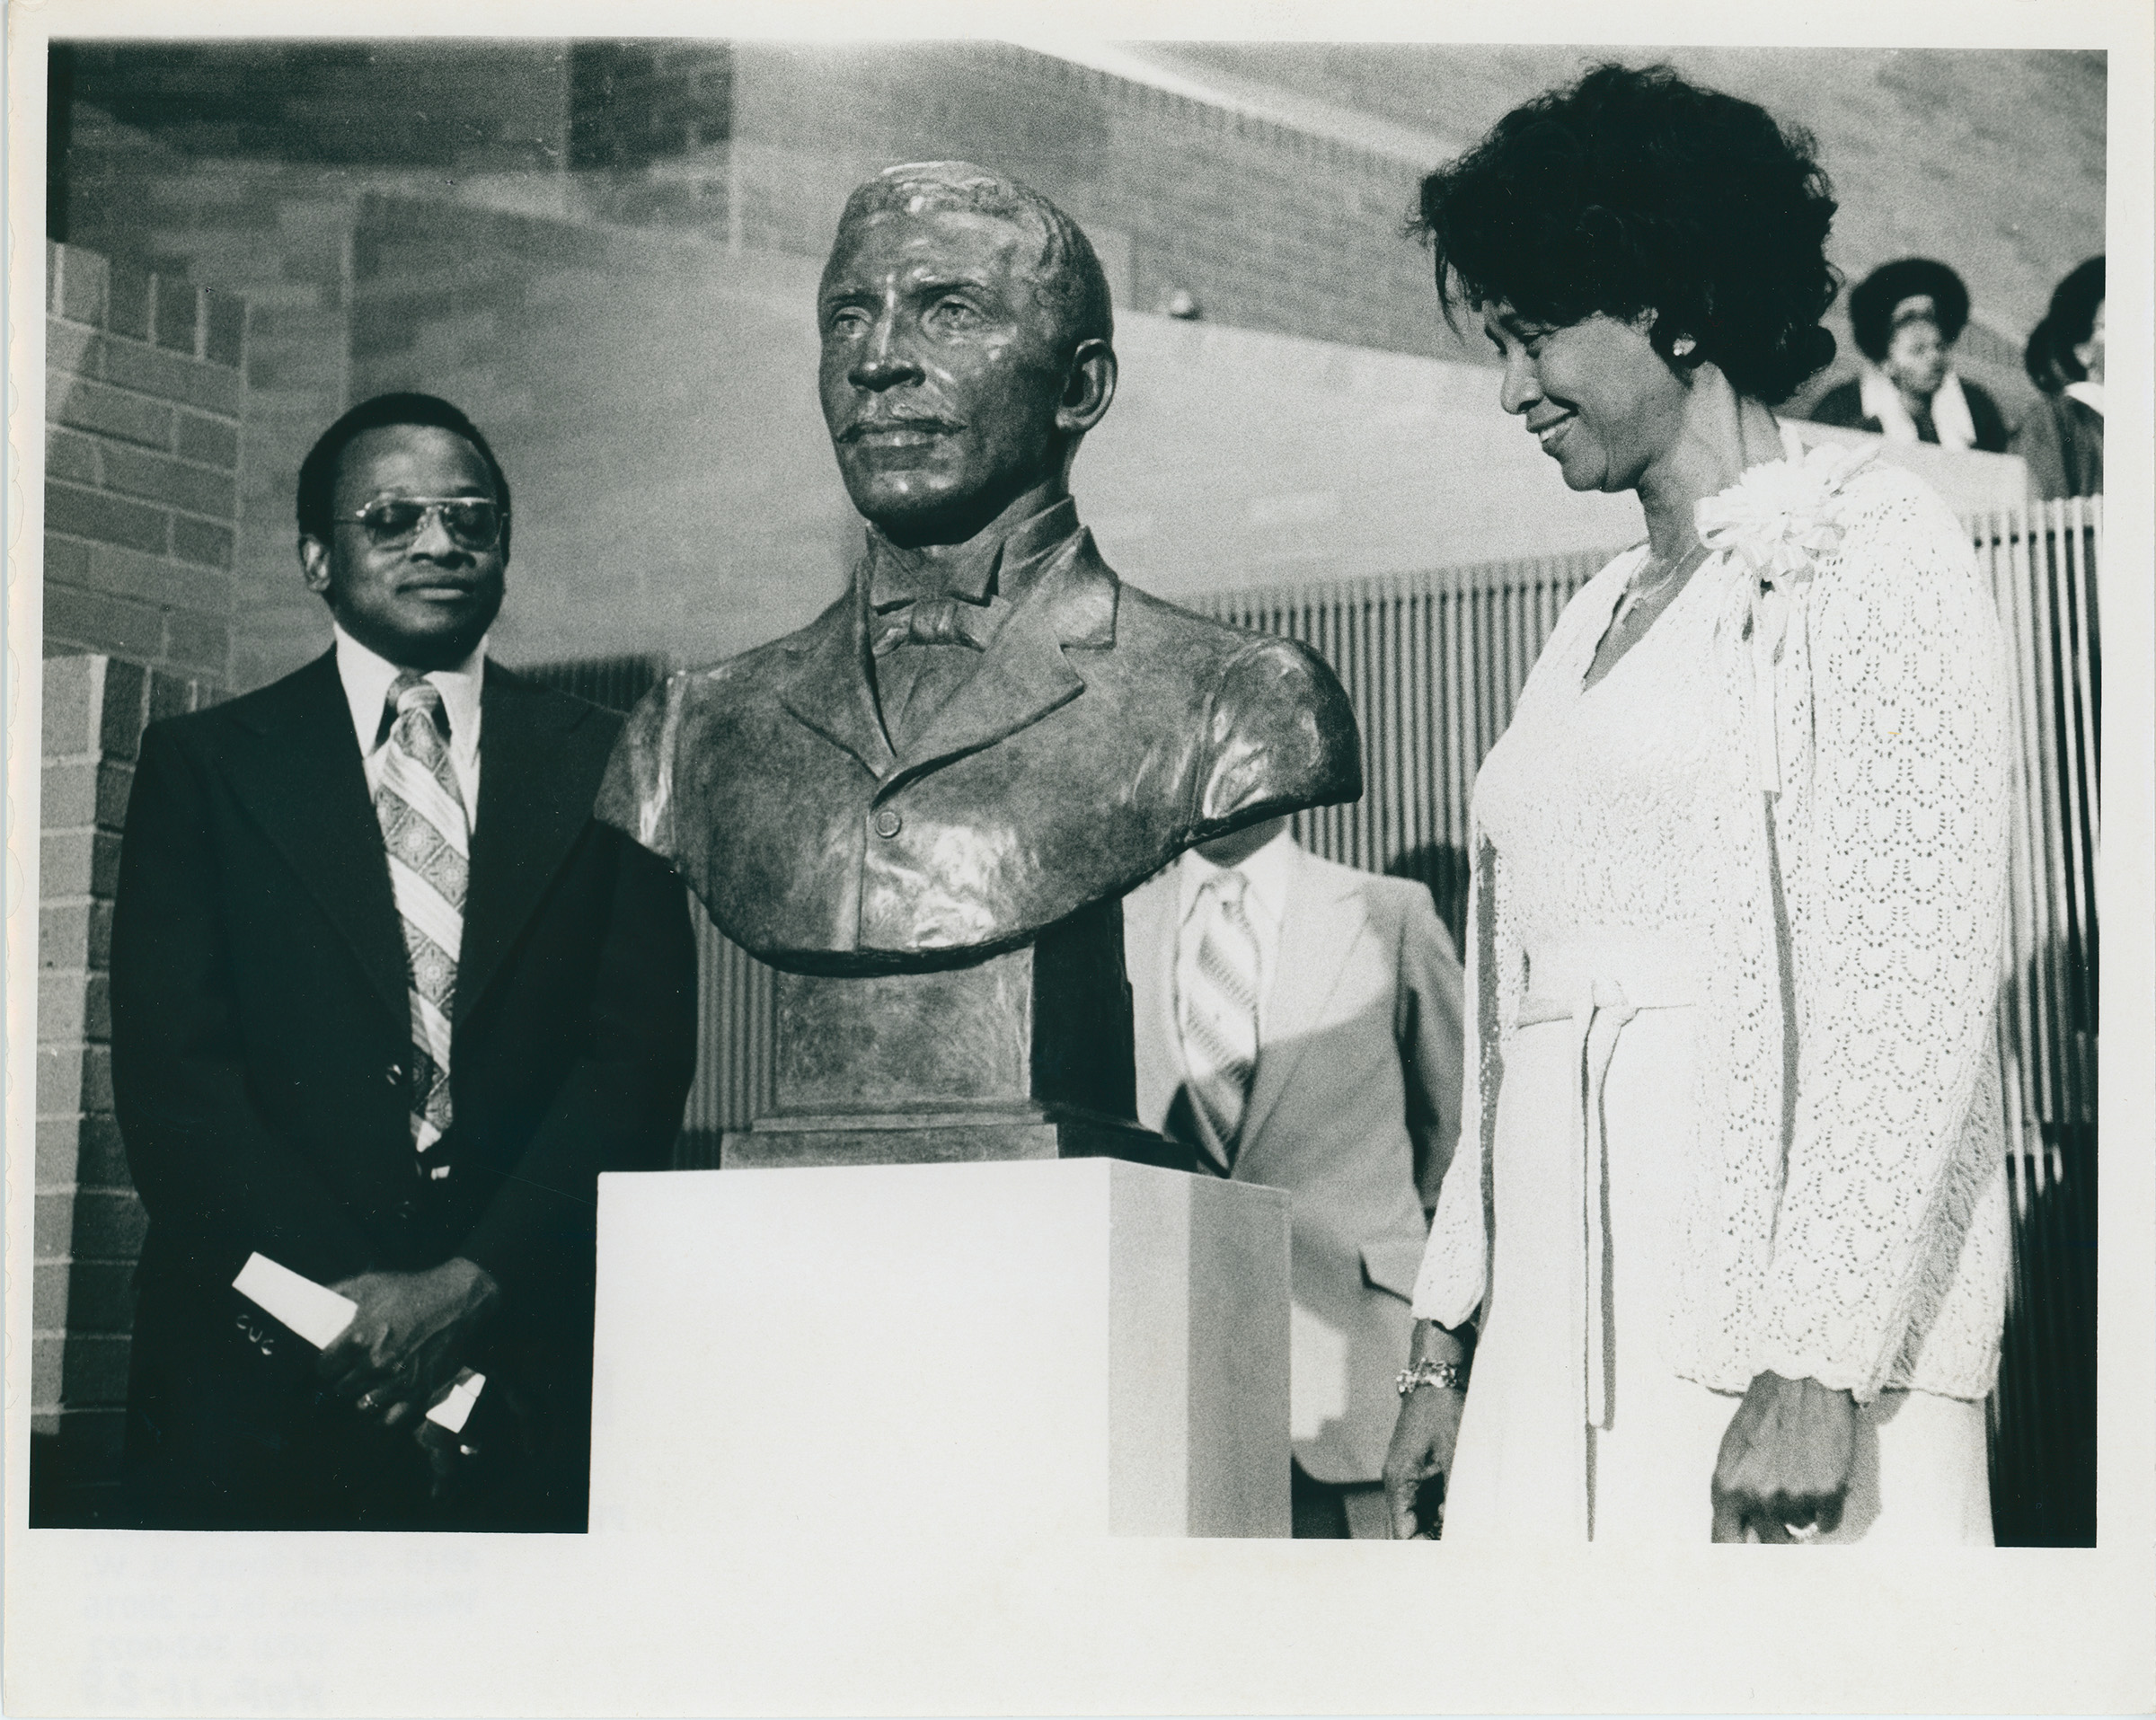 George Washington Carver bust with guests